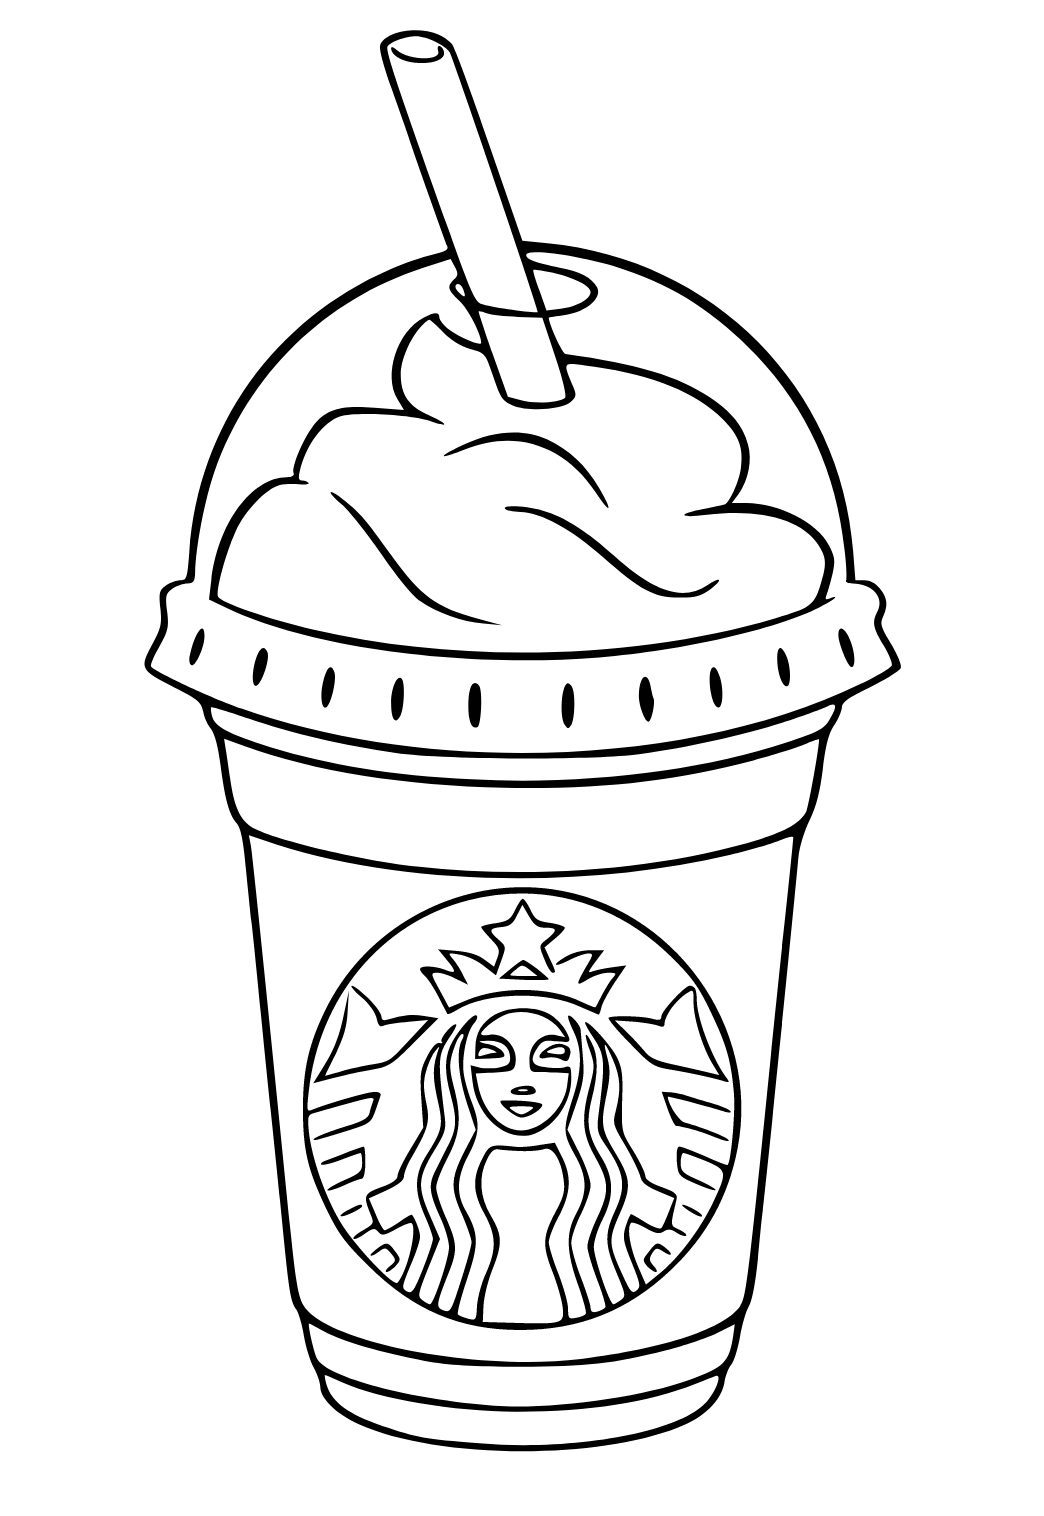 Free Printable Starbucks Real Coloring Page for Adults and Kids ...